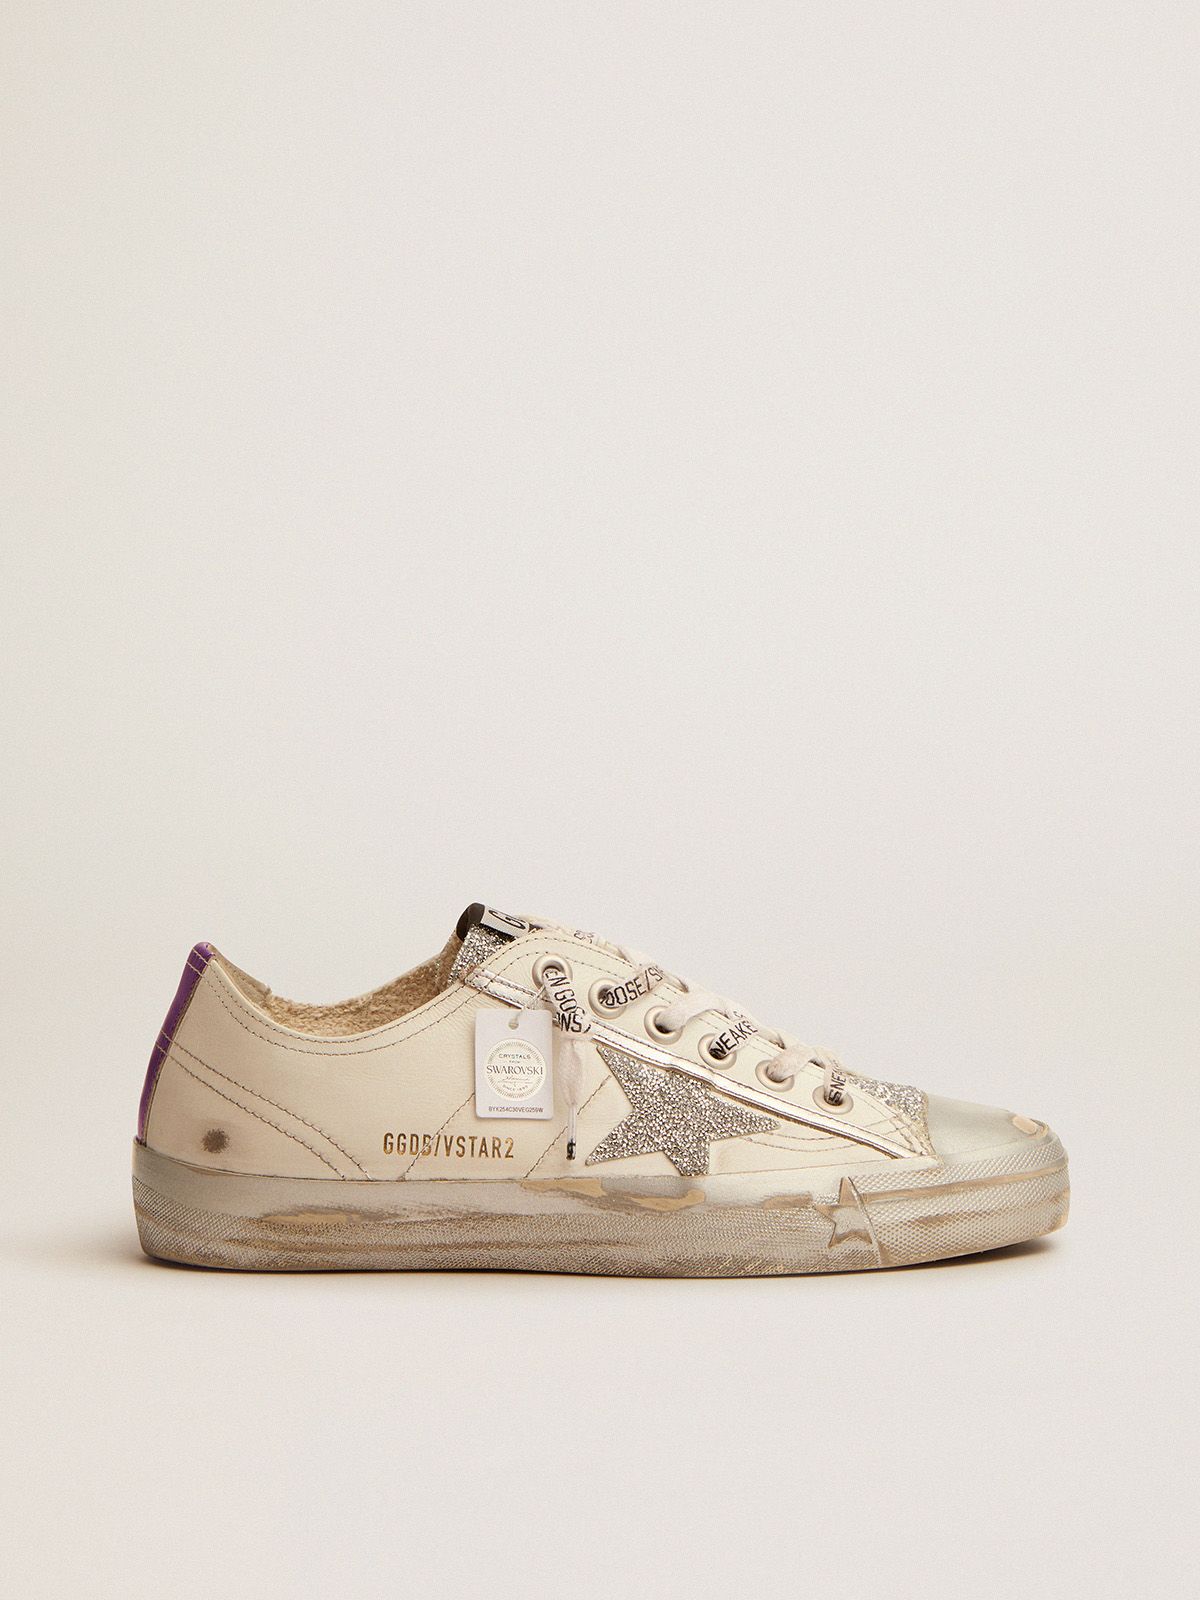 Uomo Golden Goose V-Star LTD sneakers in white leather and crystals